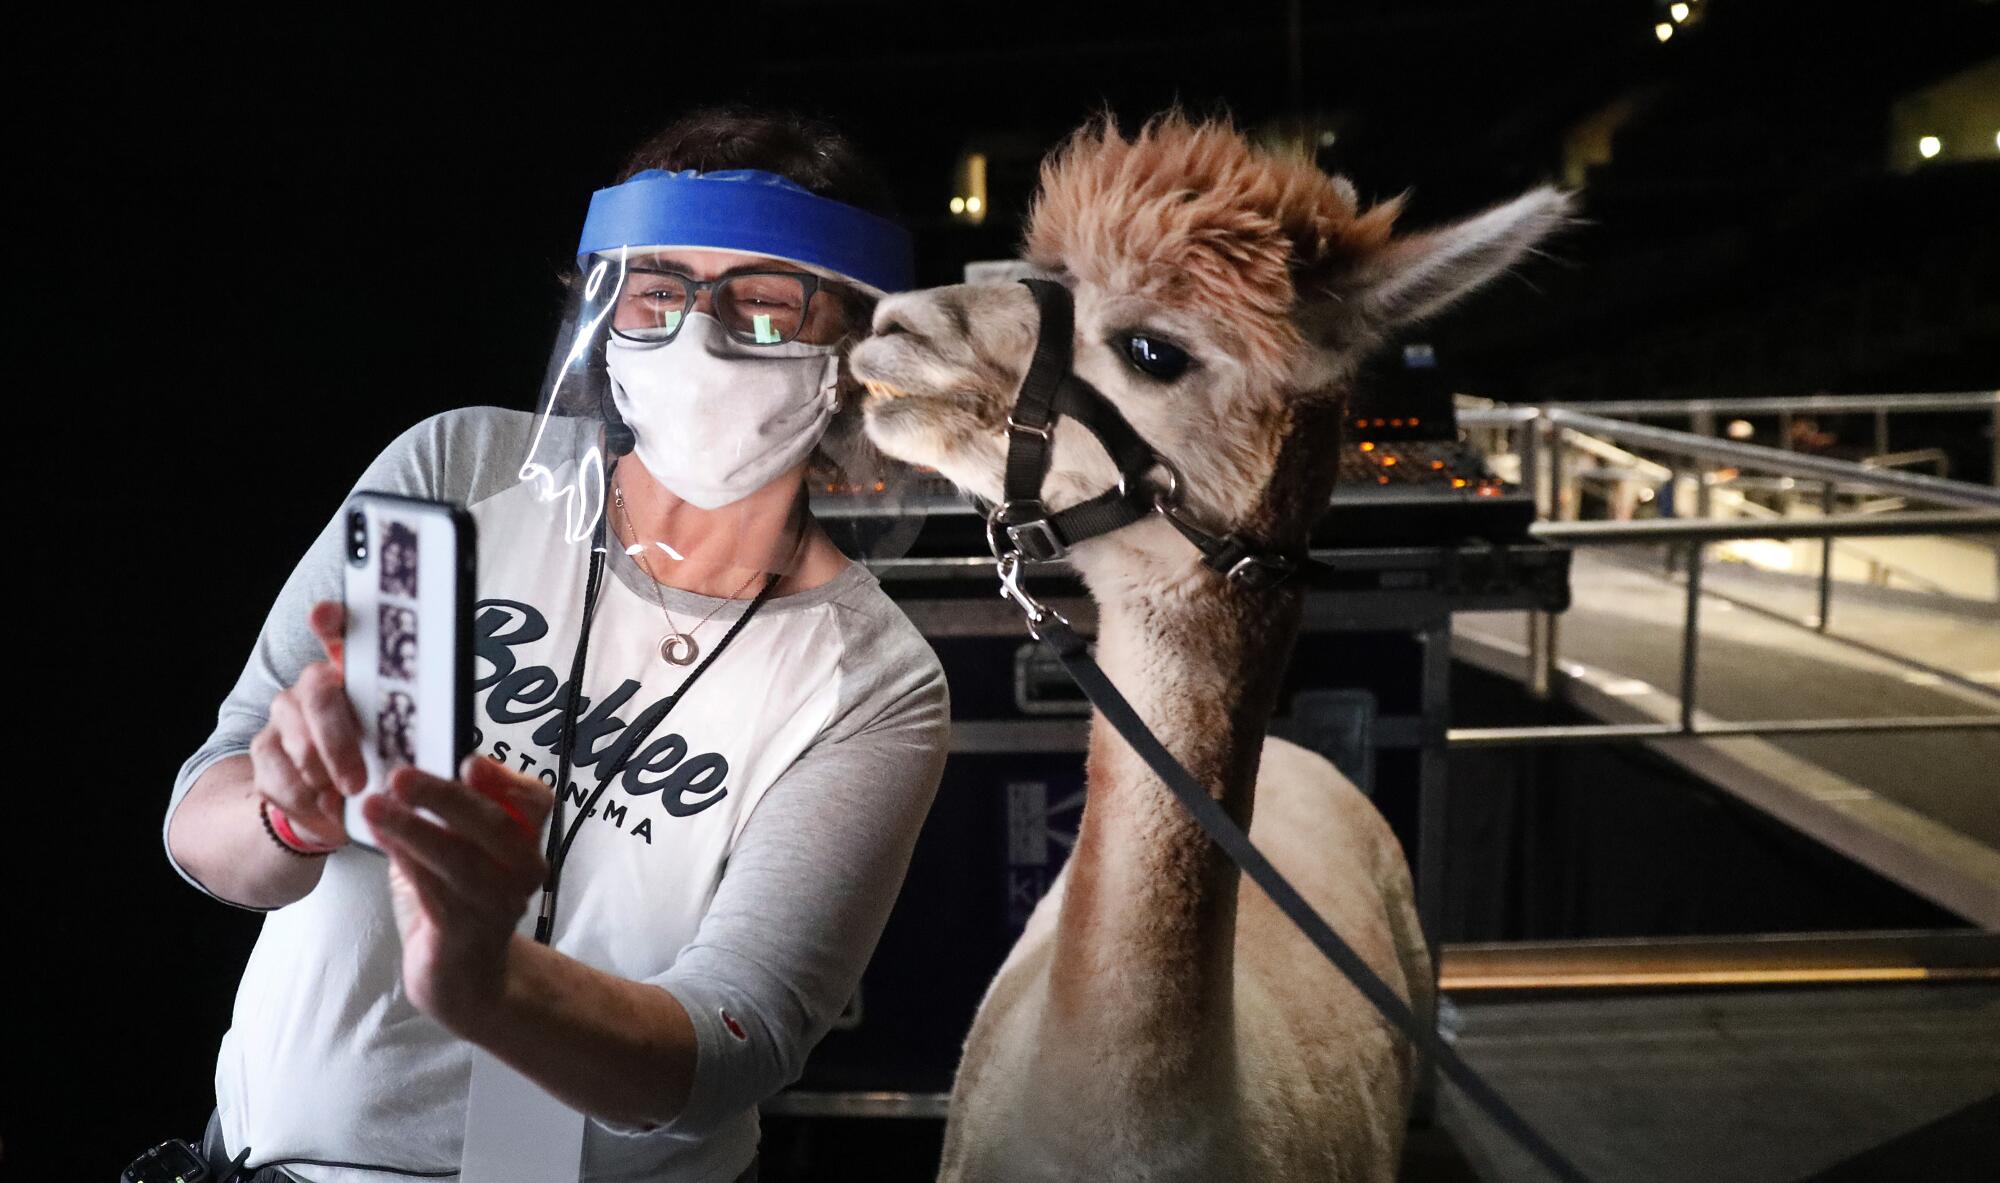 Stage manager Lynn Finkel takes a selfie with Isabella the alpaca.